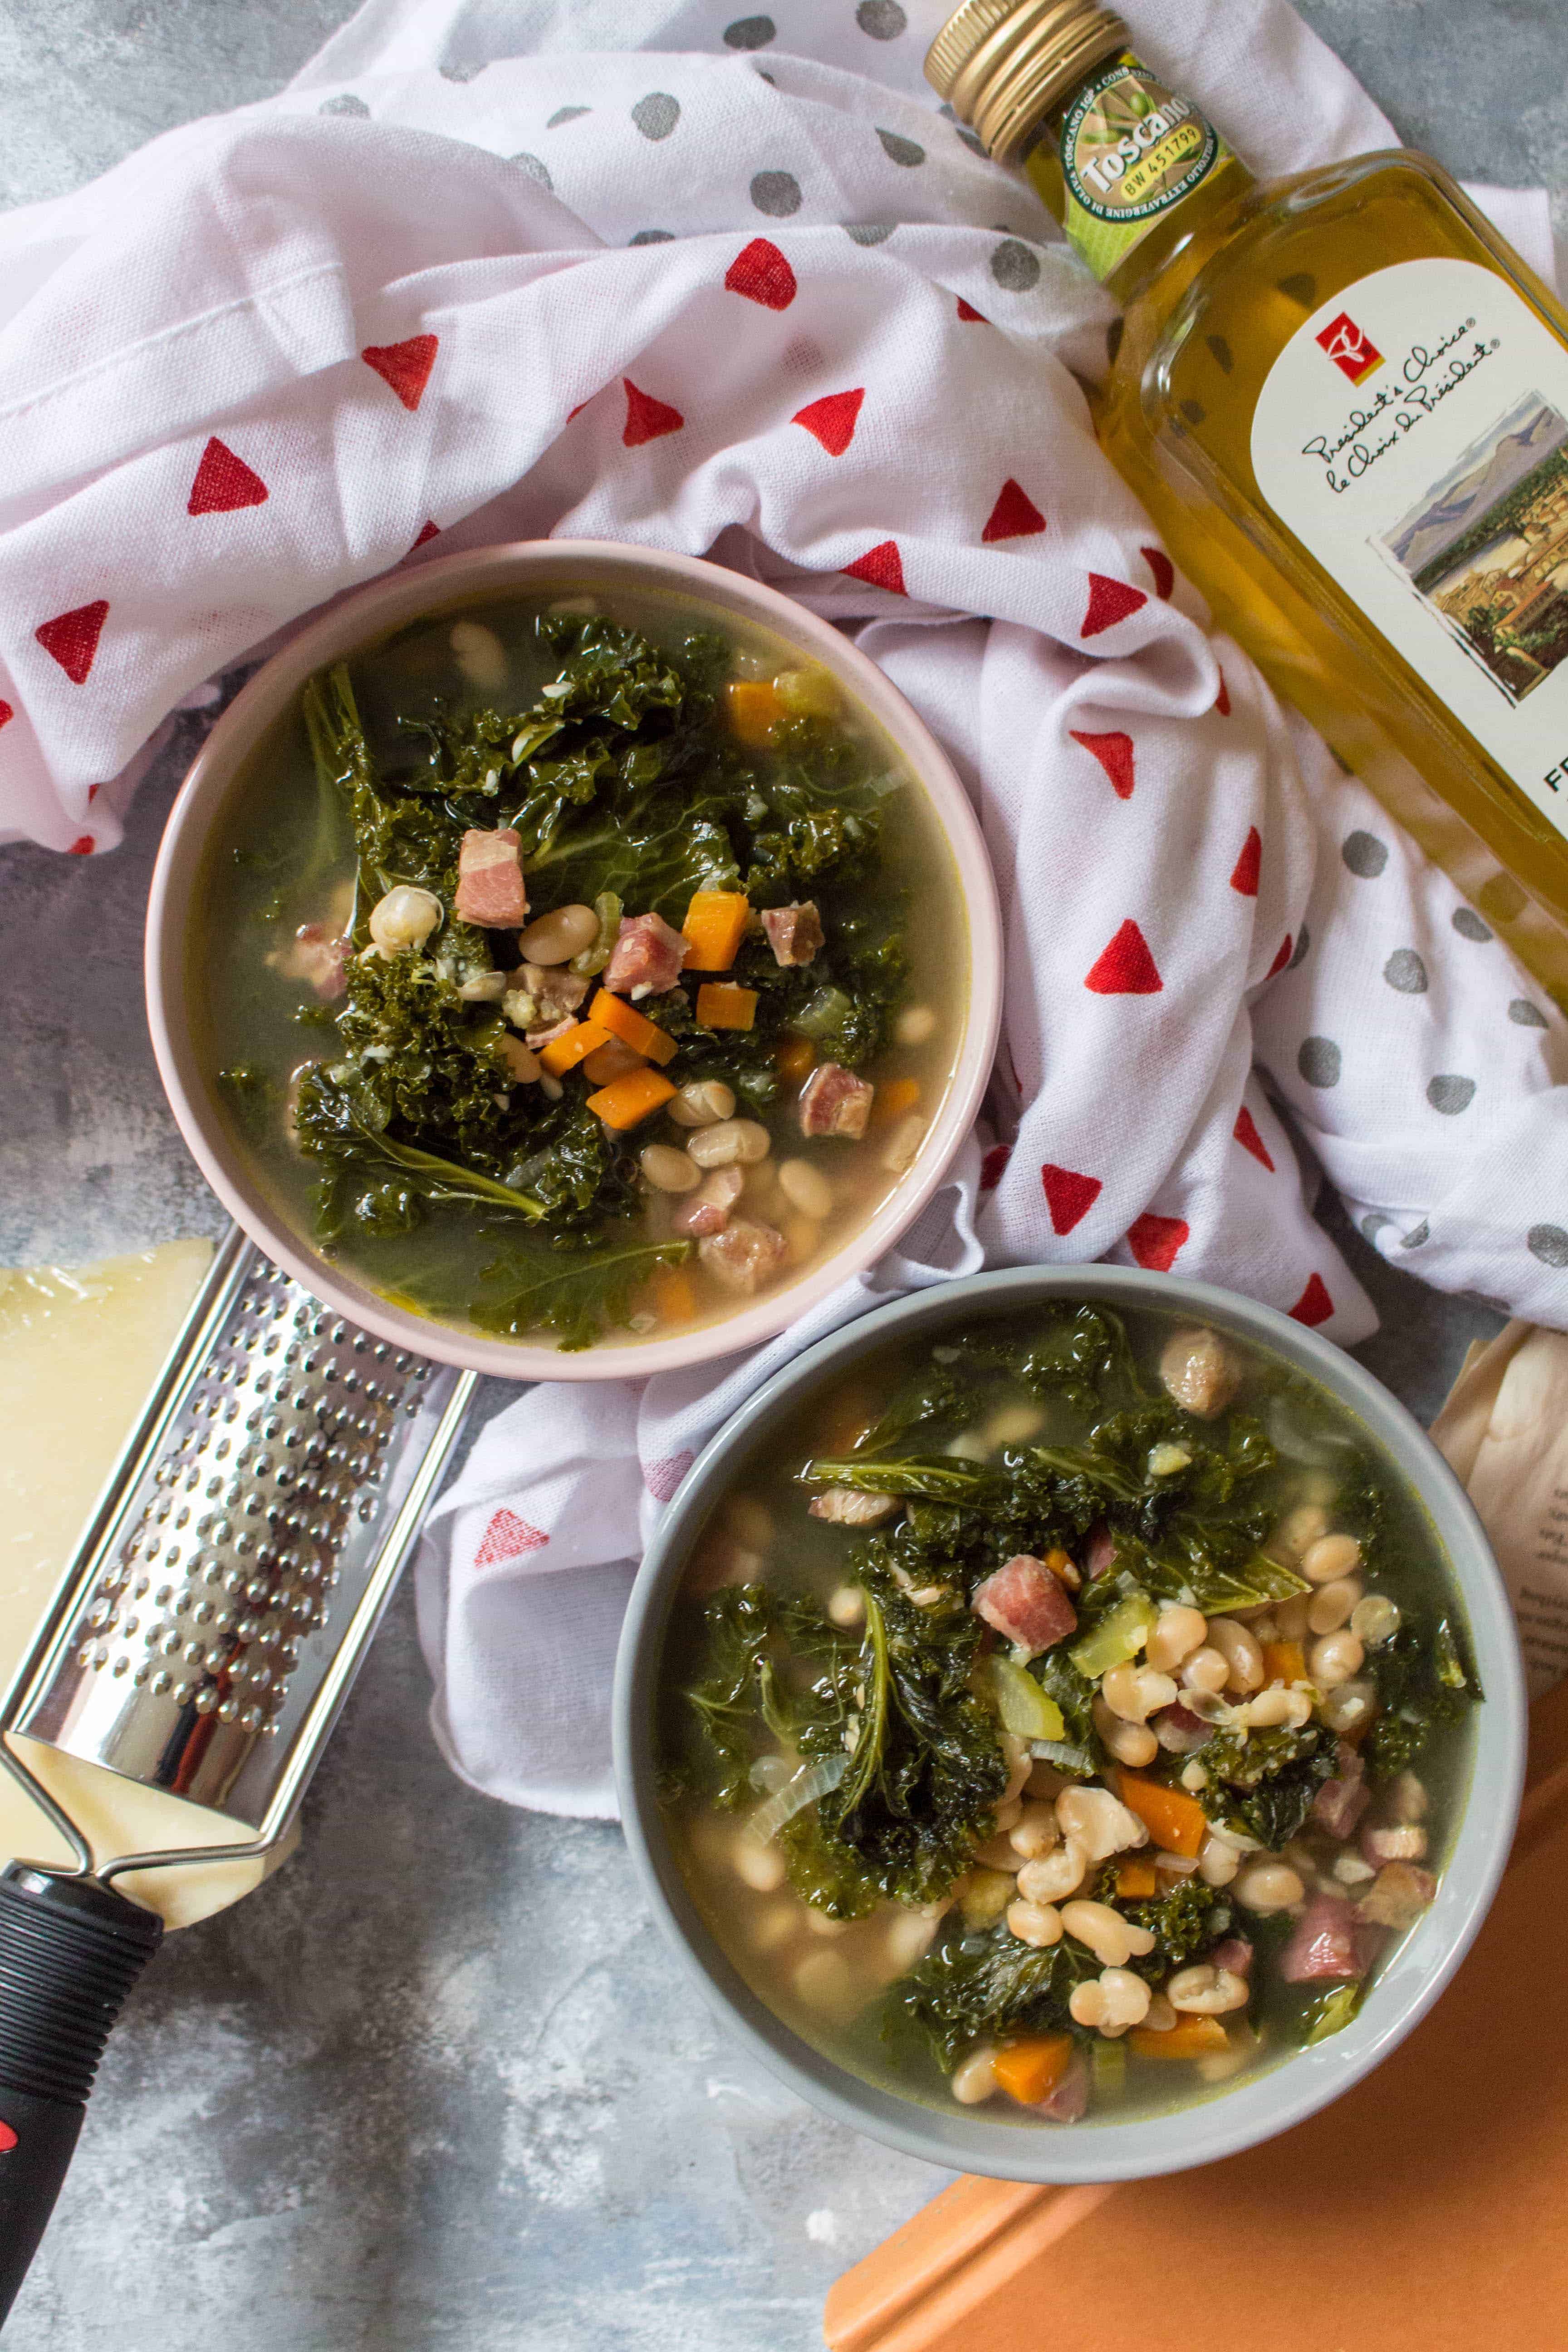 This hearty tuscan white bean, kale, pancetta, and polenta soup is so easy to make and is perfect to cozy up to on a cool fall day.